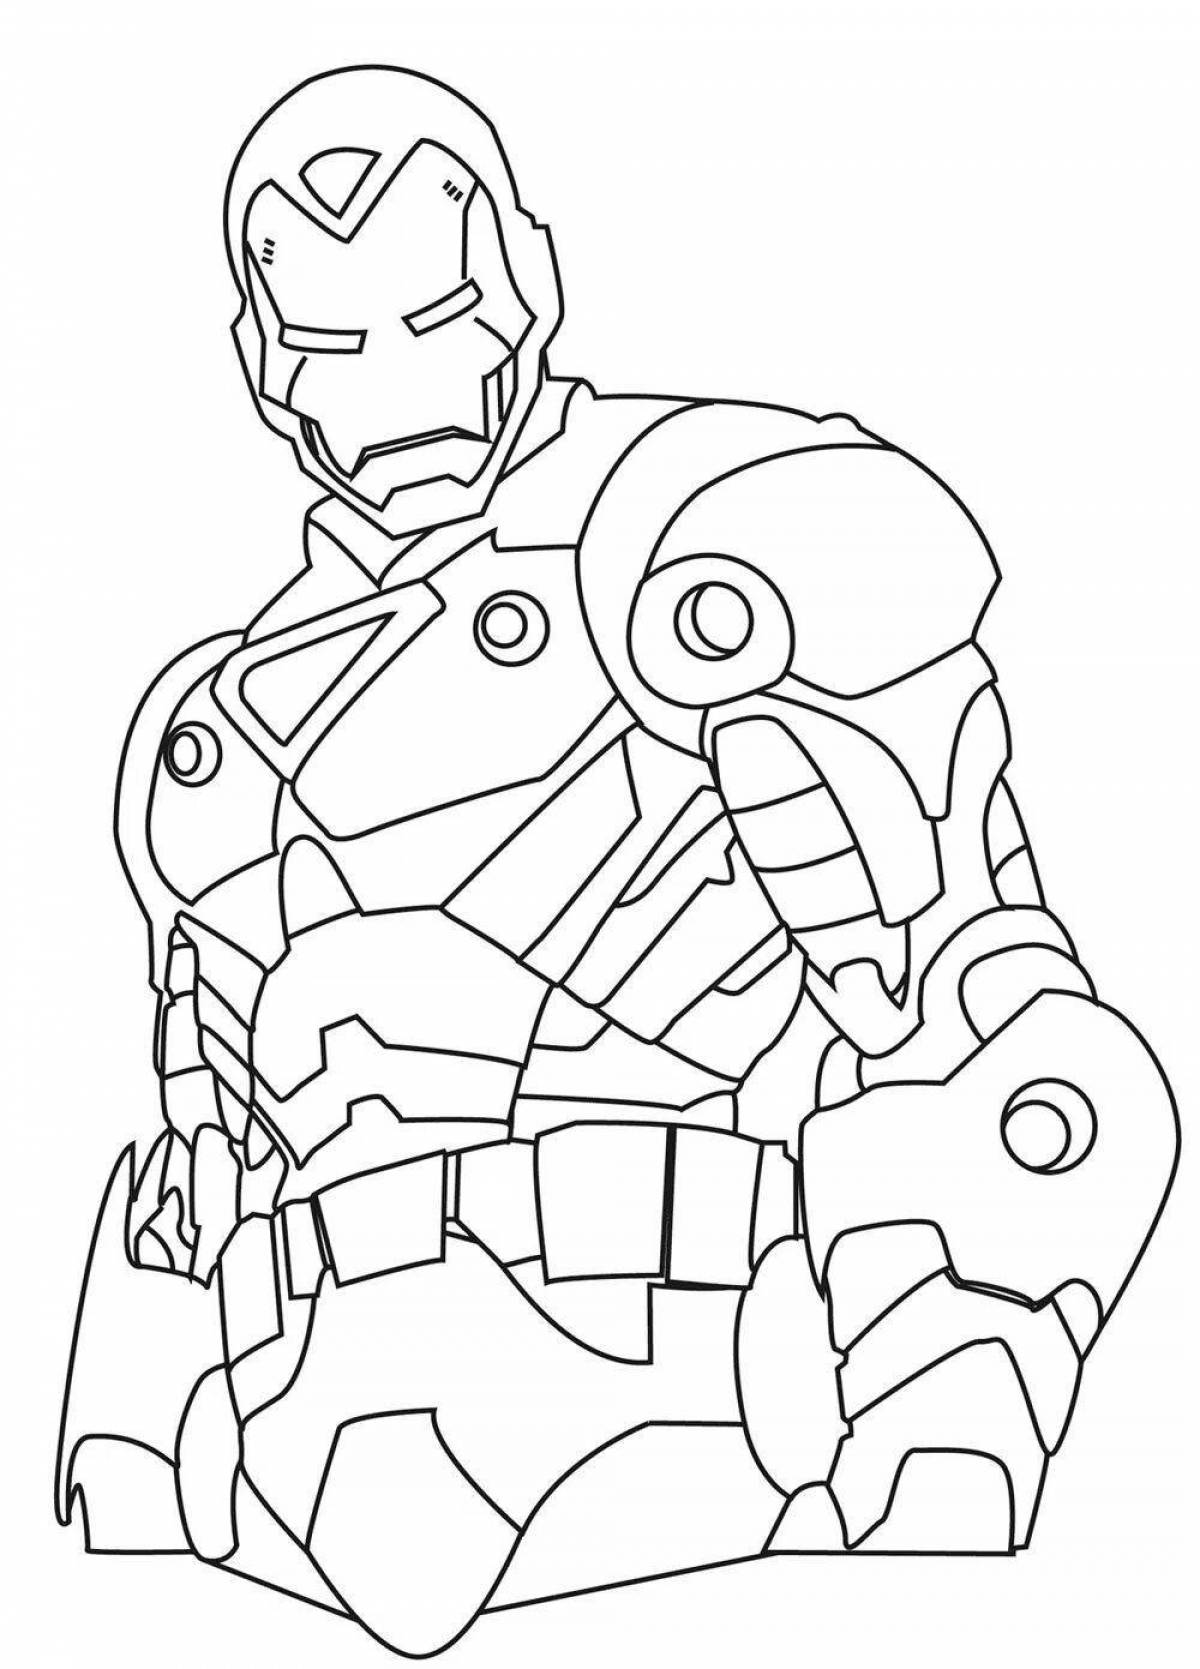 Colorful iron man coloring page